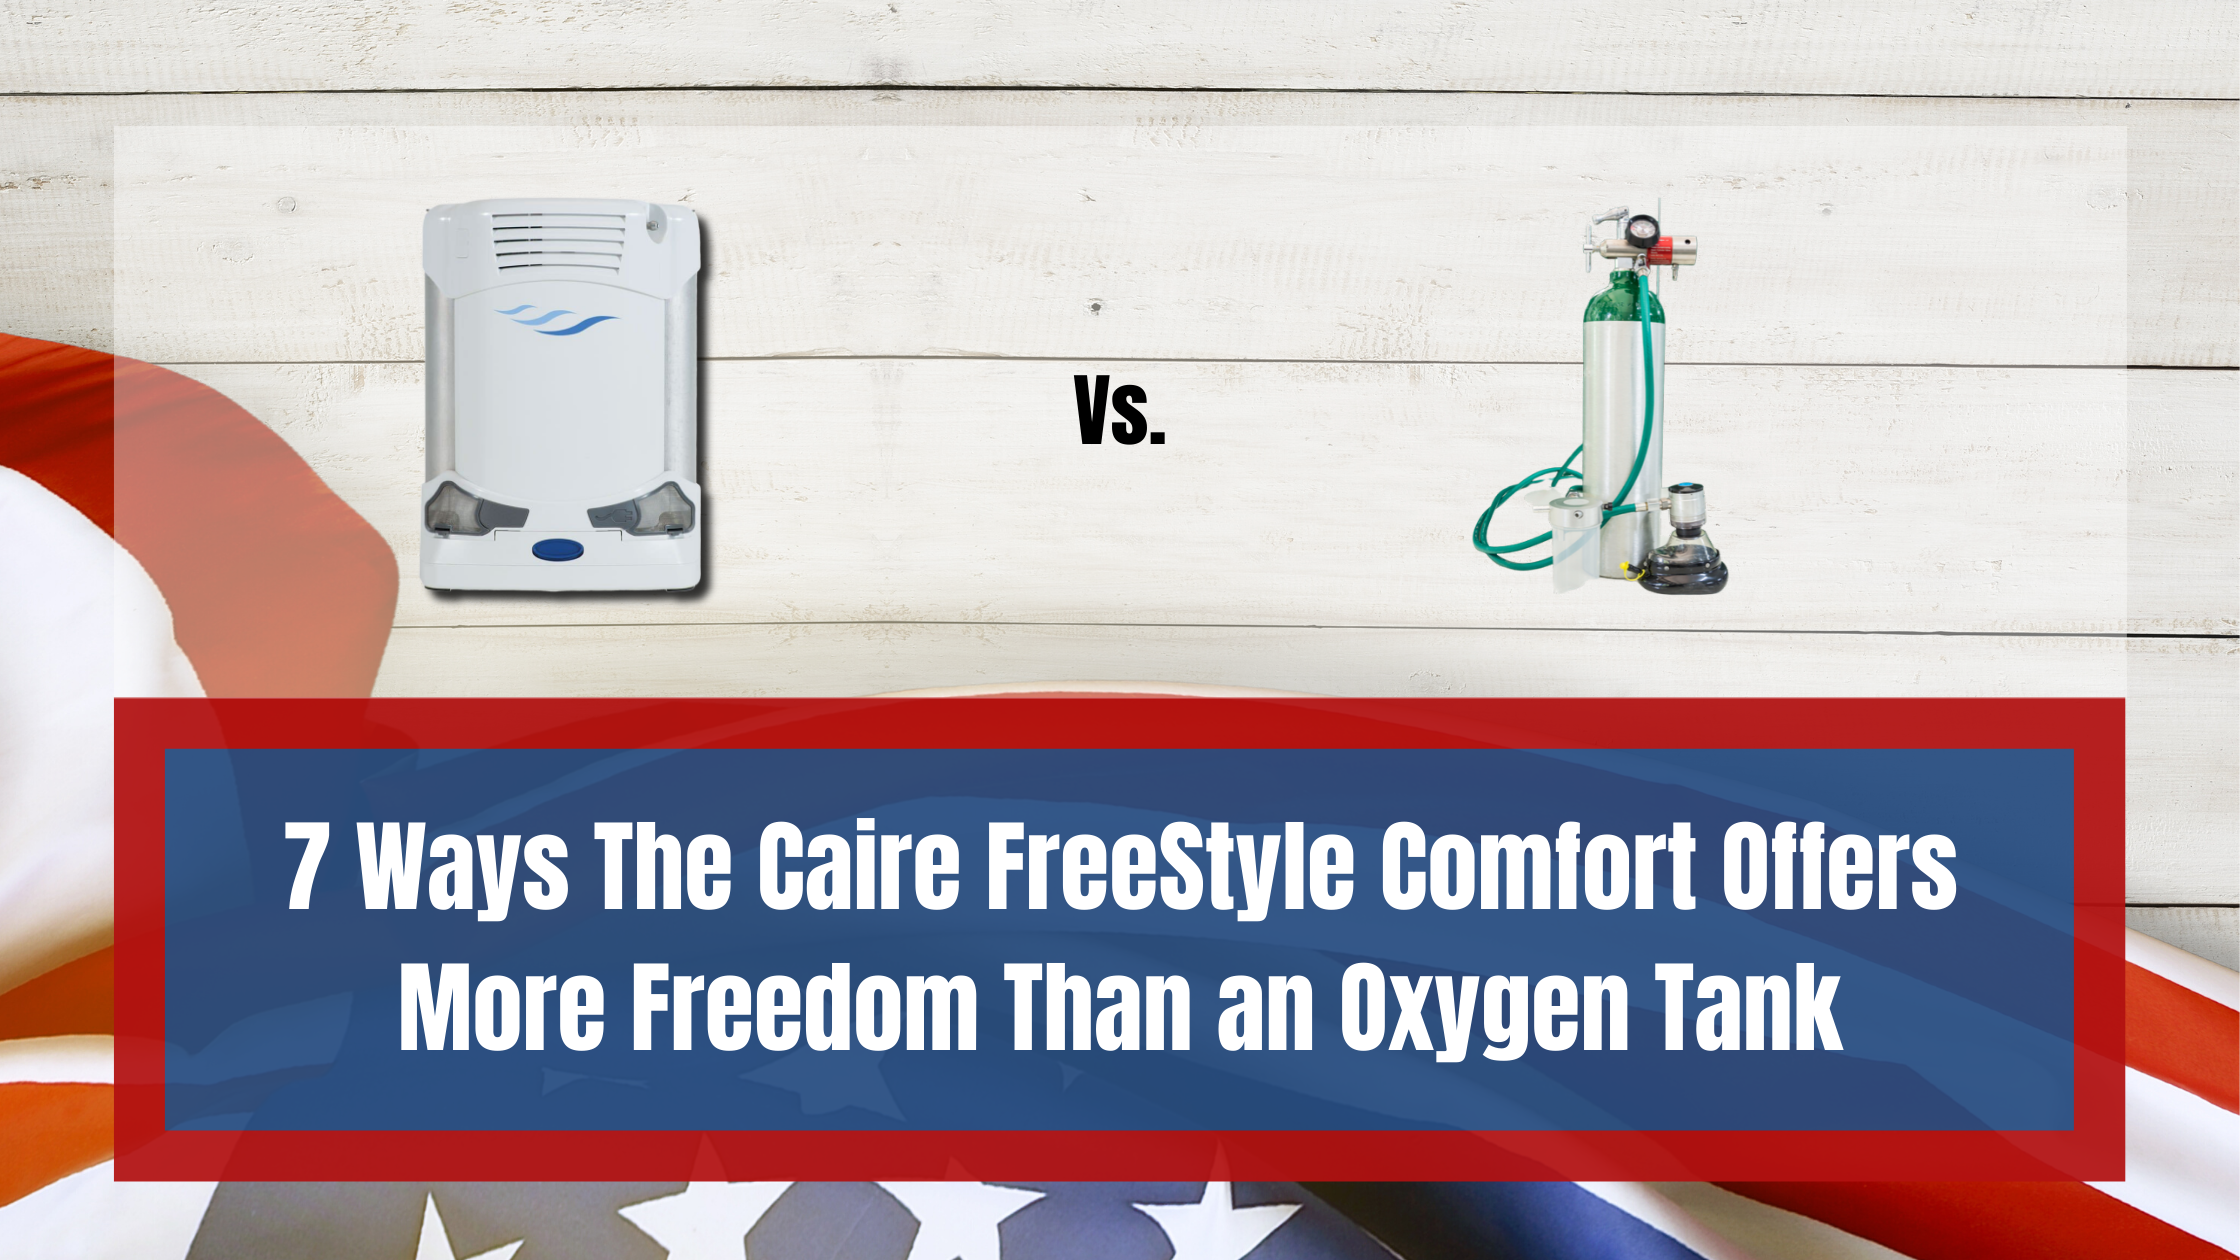 7 Ways The Caire FreeStyle Comfort Offers More Freedom Than an Oxygen Tank